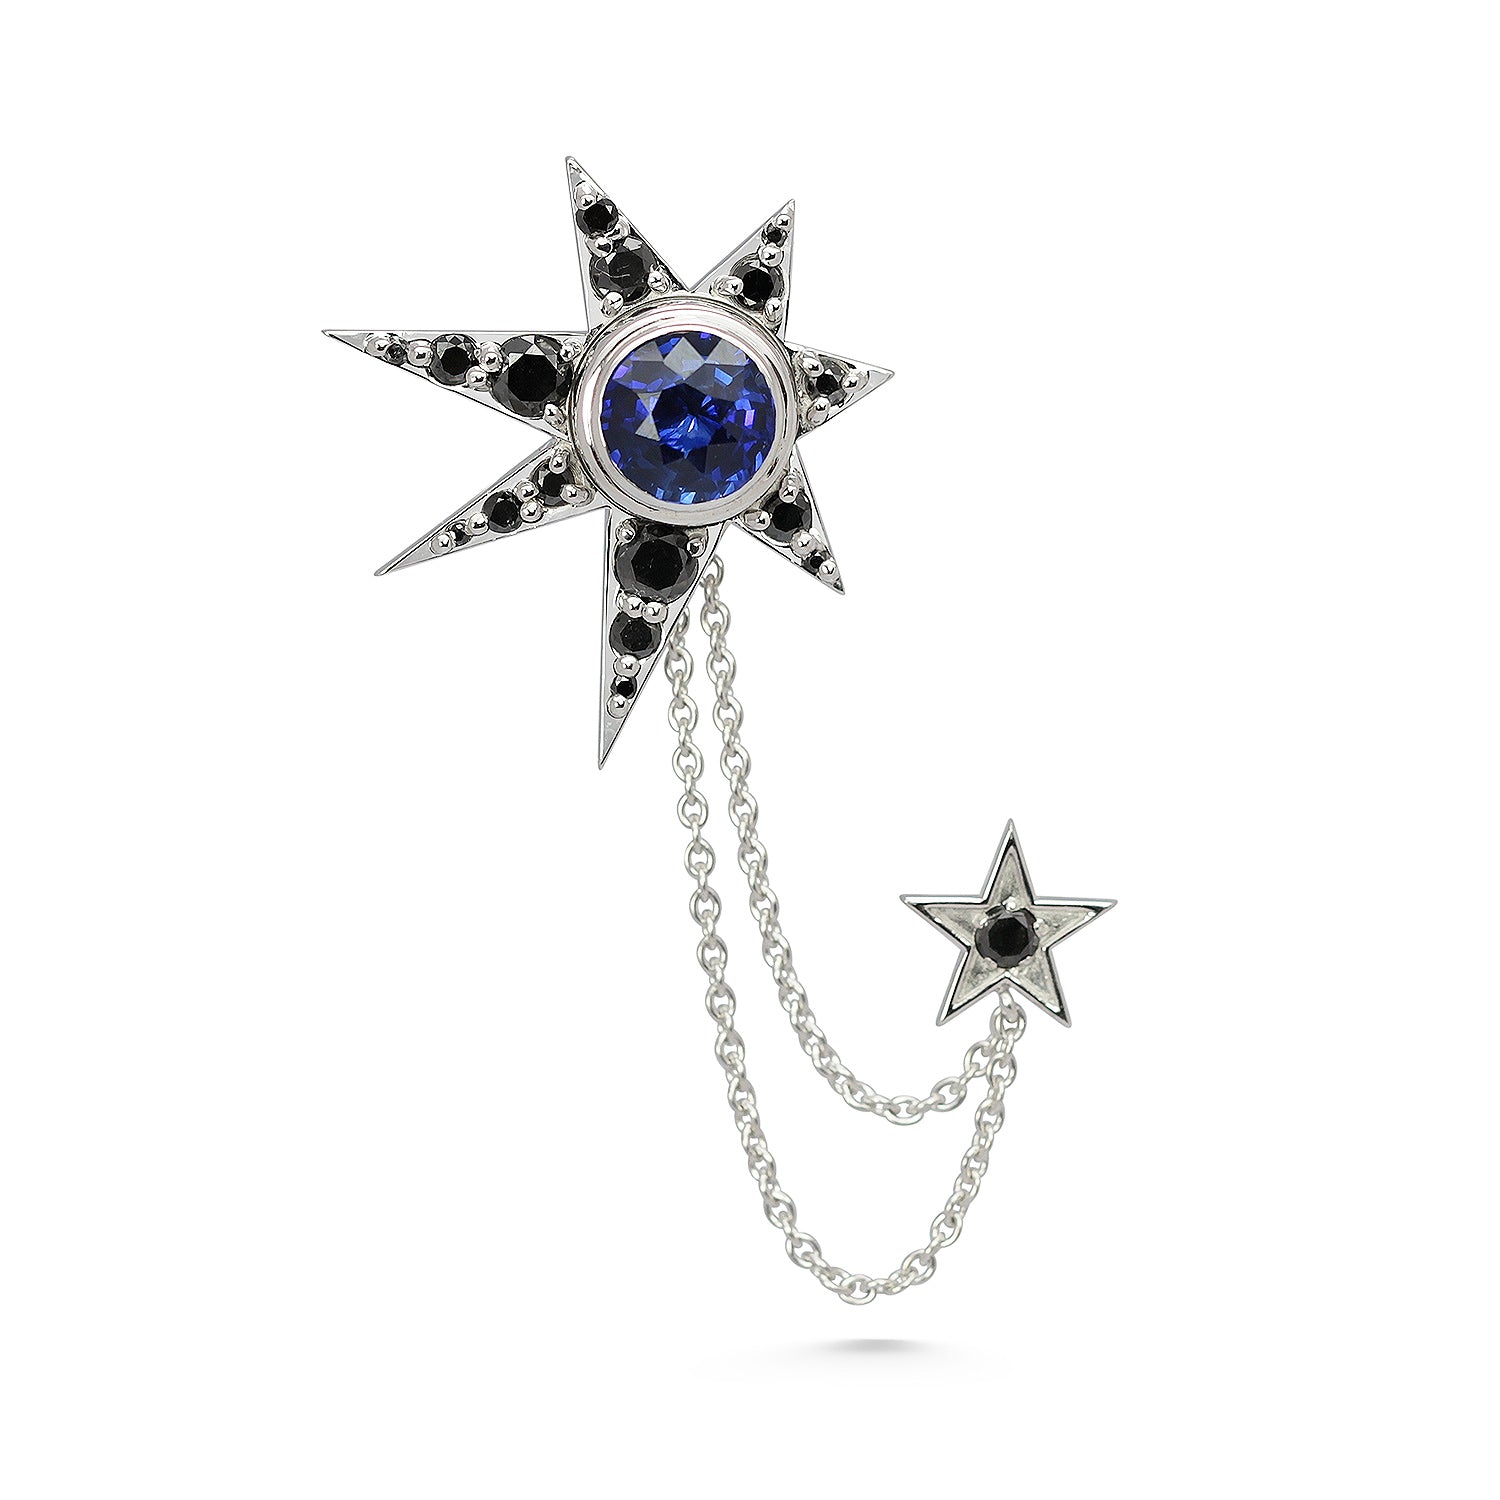 Bespoke Ev asymmetric stud earrings in 18ct recycled white gold with blue fair-traded sapphires and black diamonds 2